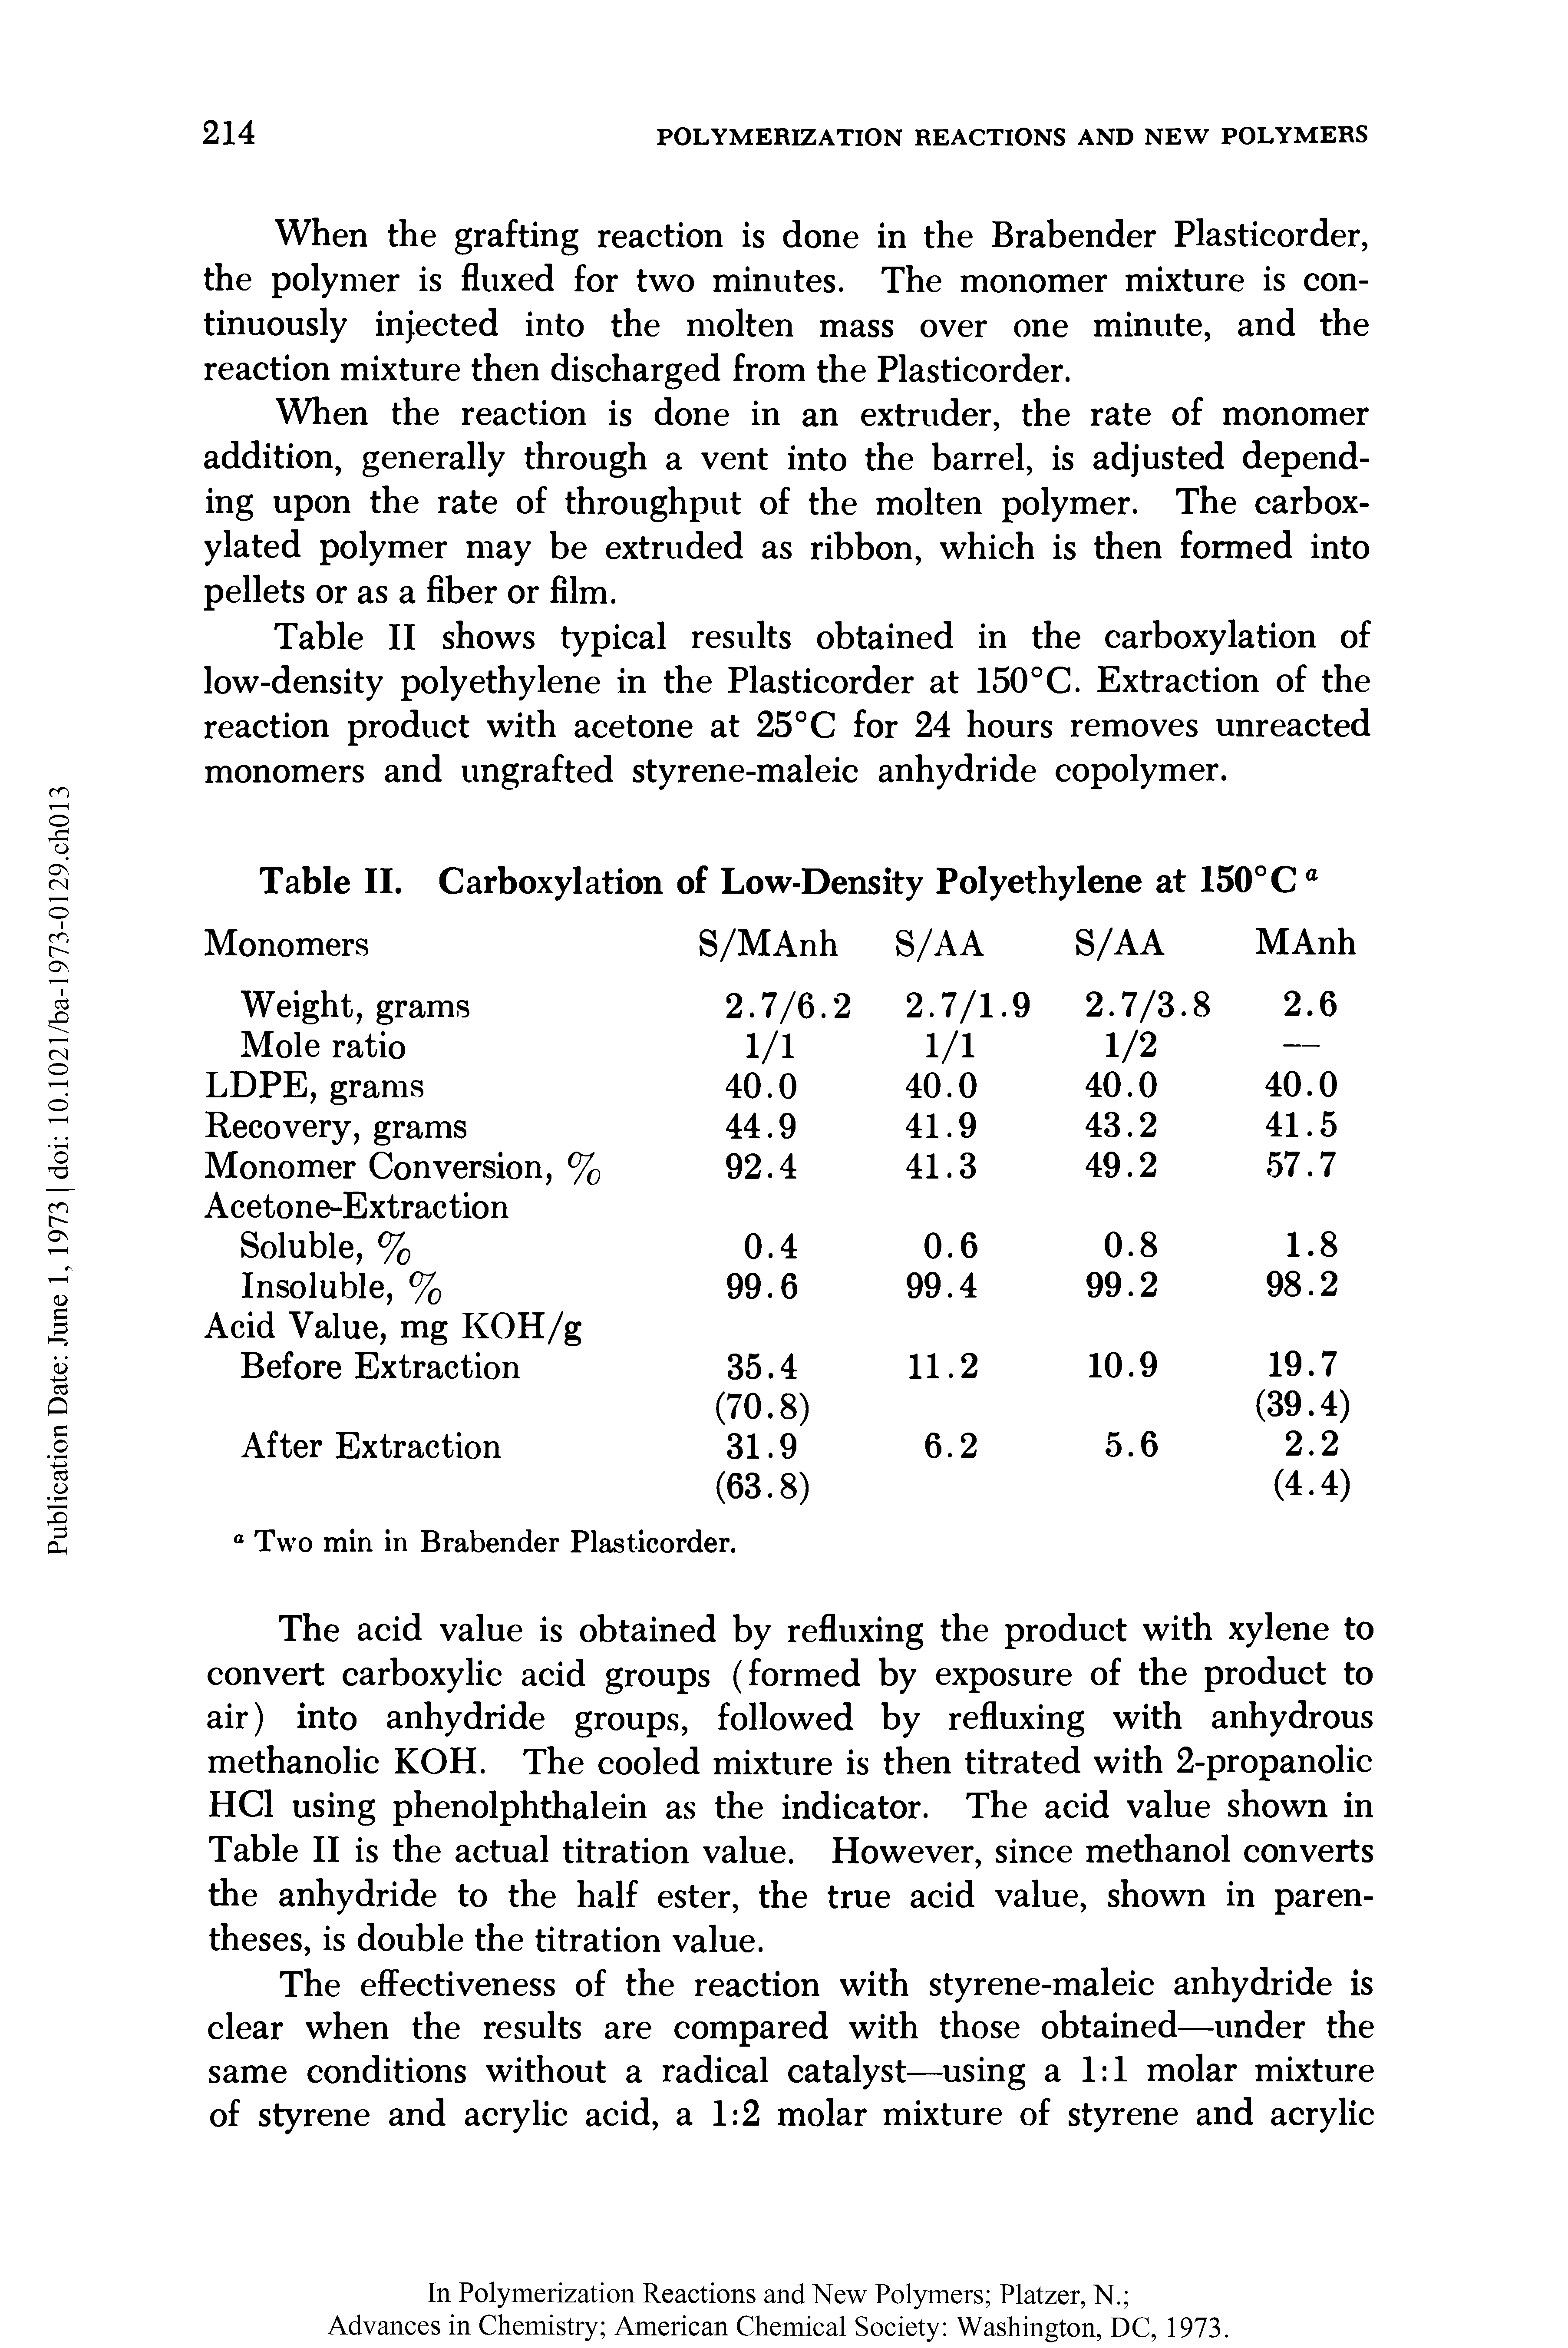 Table II shows typical results obtained in the carboxylation of low-density polyethylene in the Plasticorder at 150°C. Extraction of the reaction product with acetone at 25 °C for 24 hours removes unreacted monomers and ungrafted styrene-maleic anhydride copolymer.